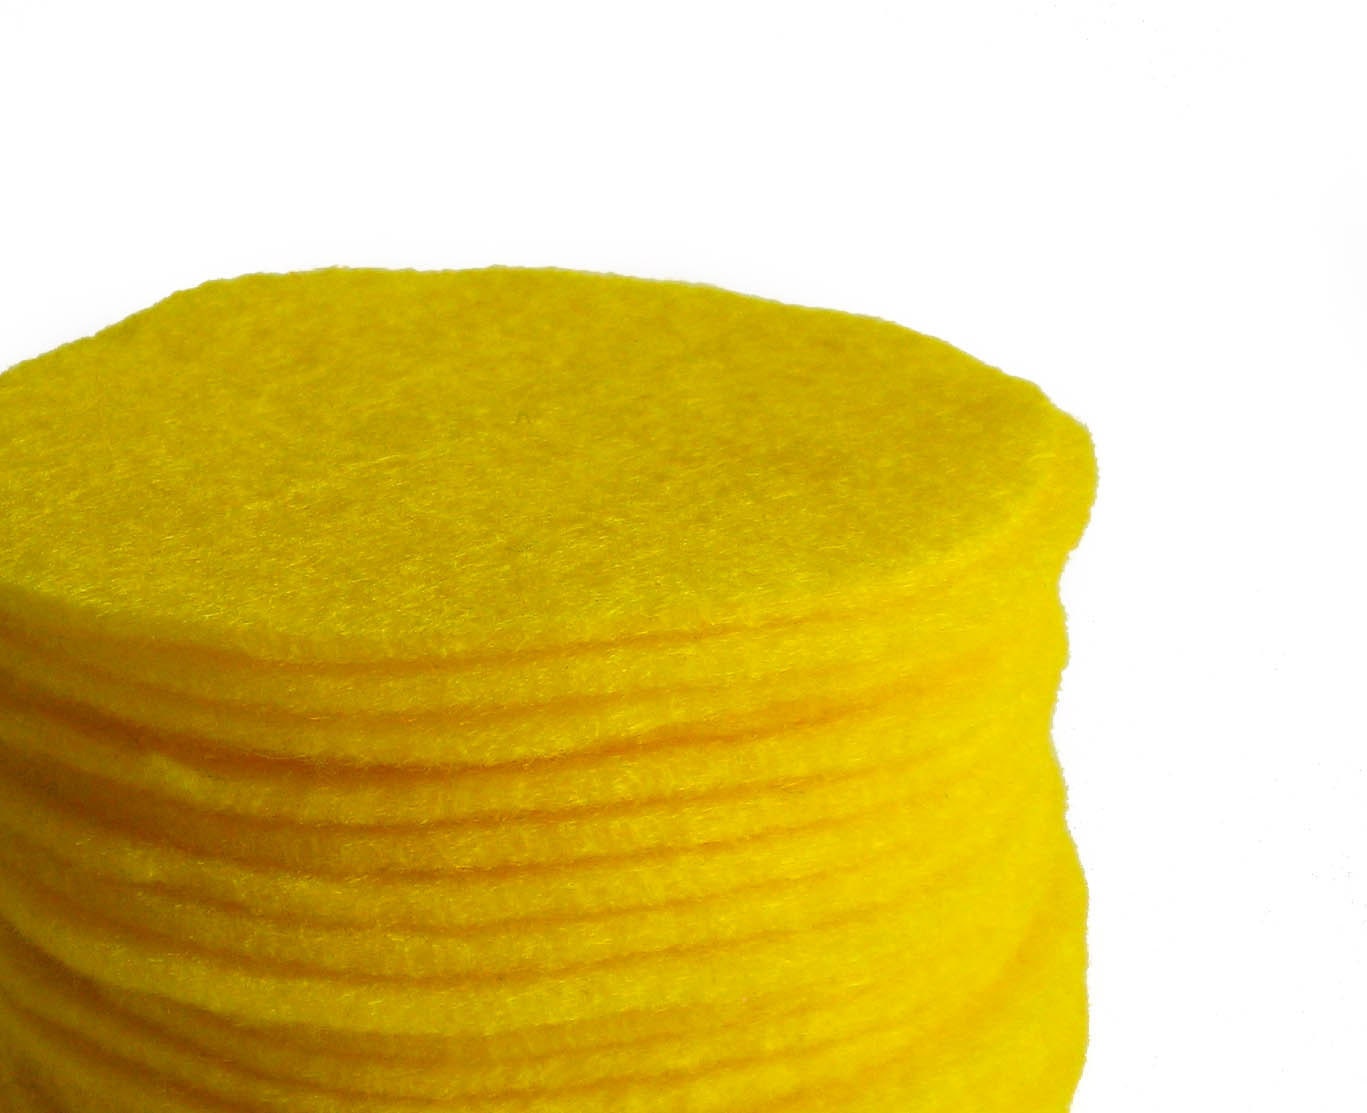  tBesme Adhesive Felt Circles  1 Inch Yellow Felt Circles Felt  Pads for DIY and Sewing Handcraft (100 Count, Yellow)